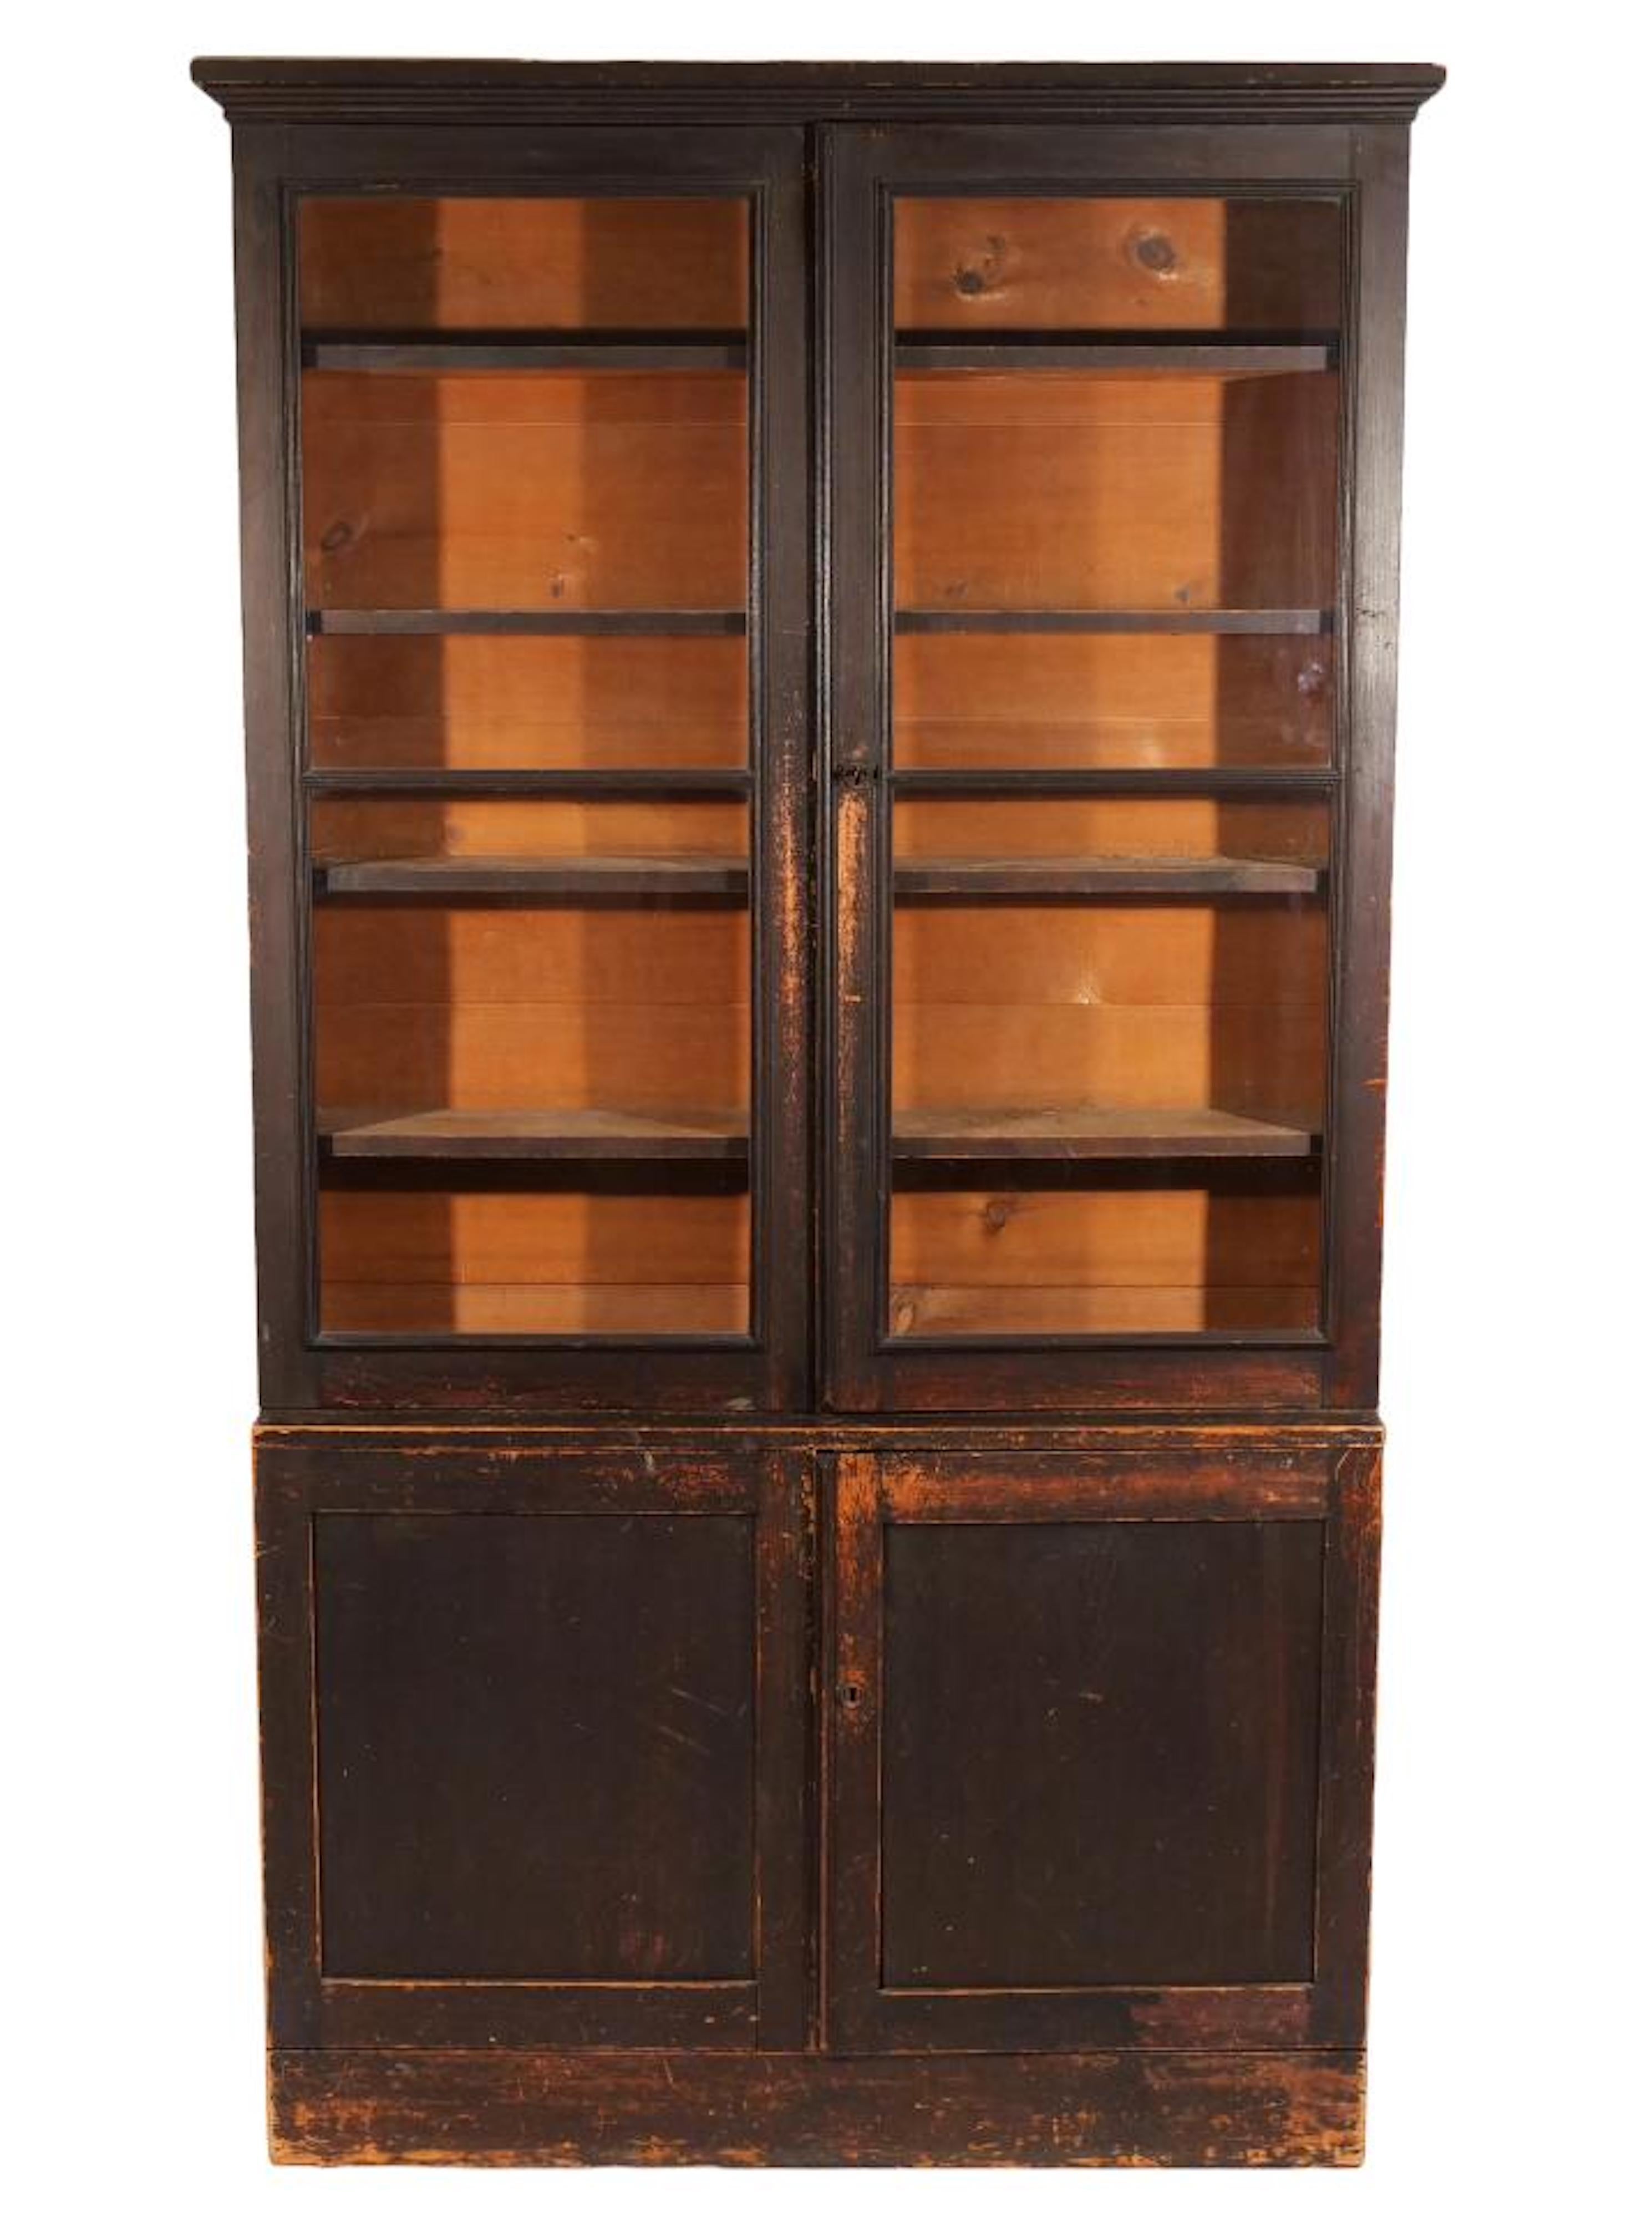 An early American painted bookcase of nice shallow dimension.  From either New York or New England, of step back-form with a molded cornice over double glazed doors, over double cabinet doors.  One piece construction.  The cabinet is painted an old